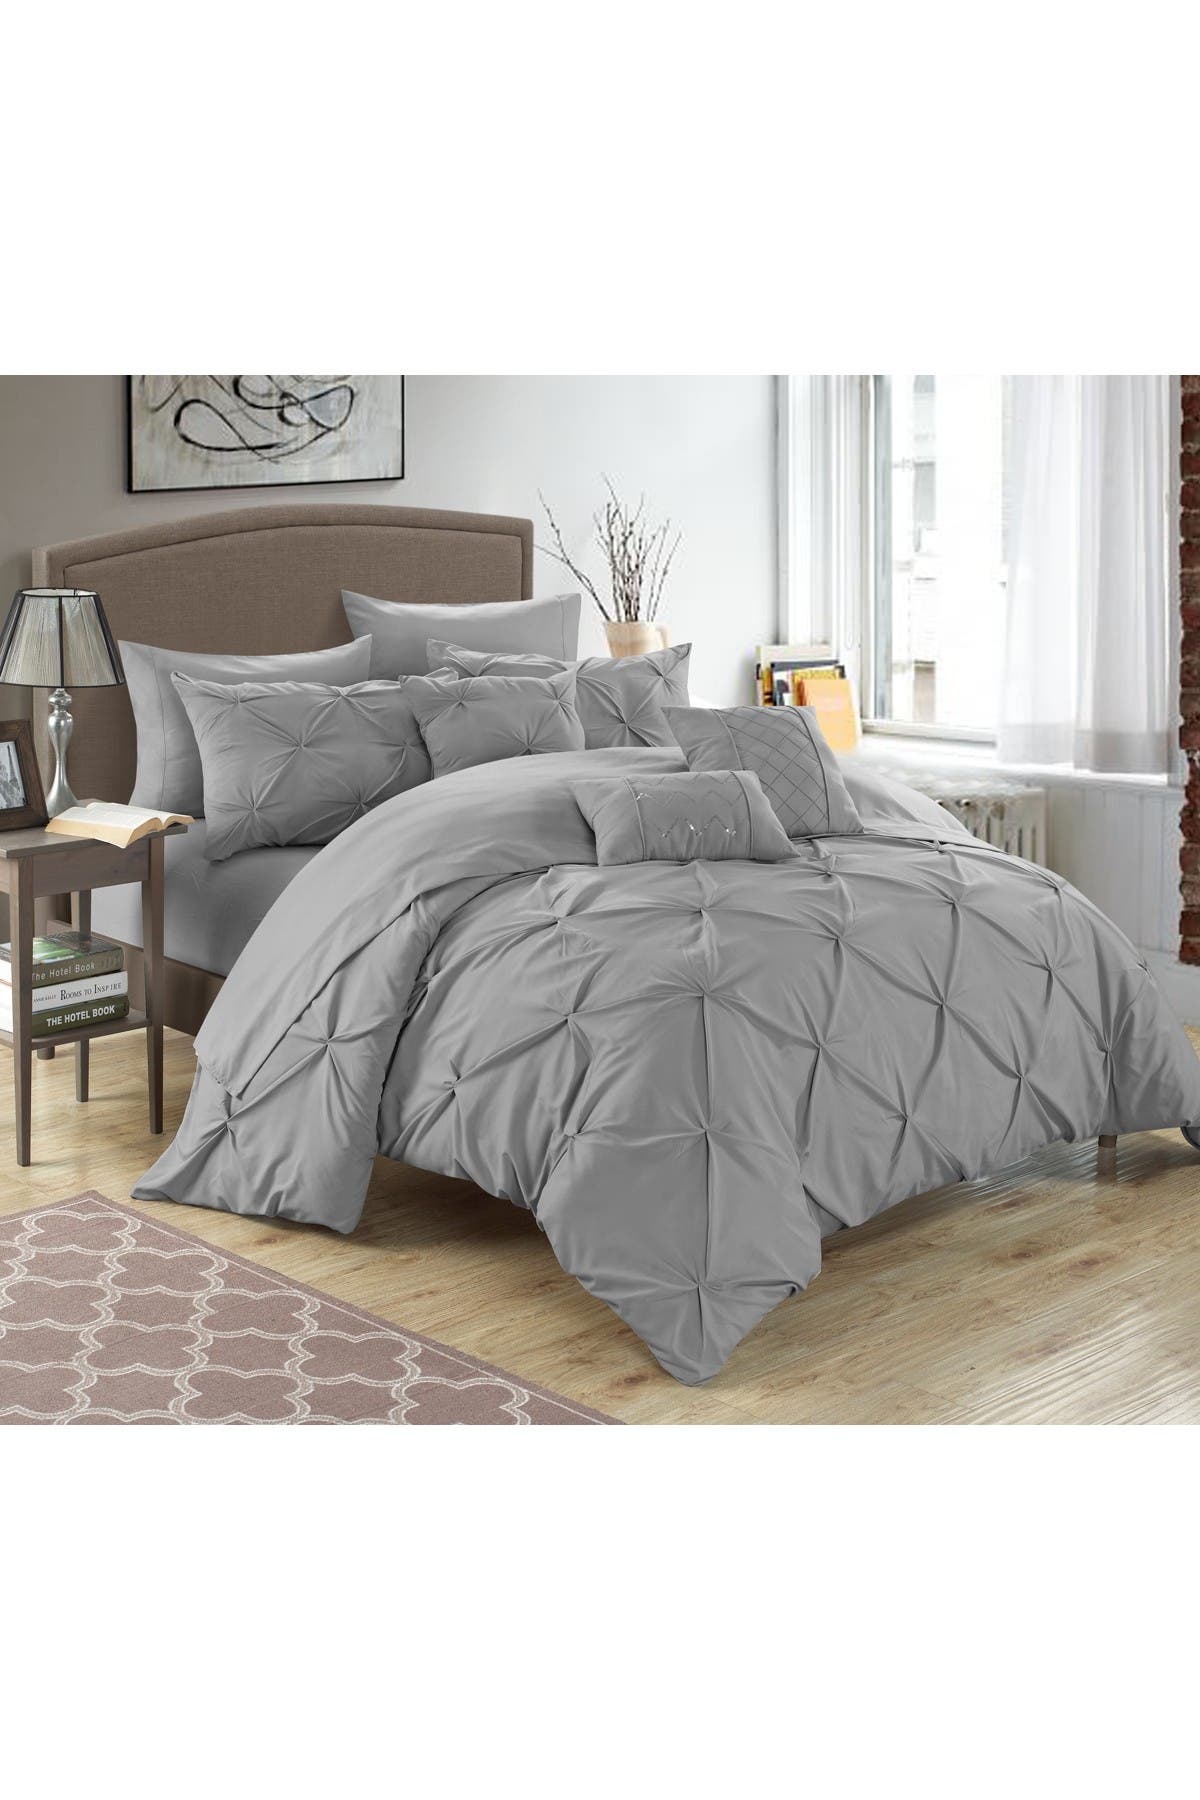 Home & Kitchen ruffled and pleated complete King Bed In a Bag ...